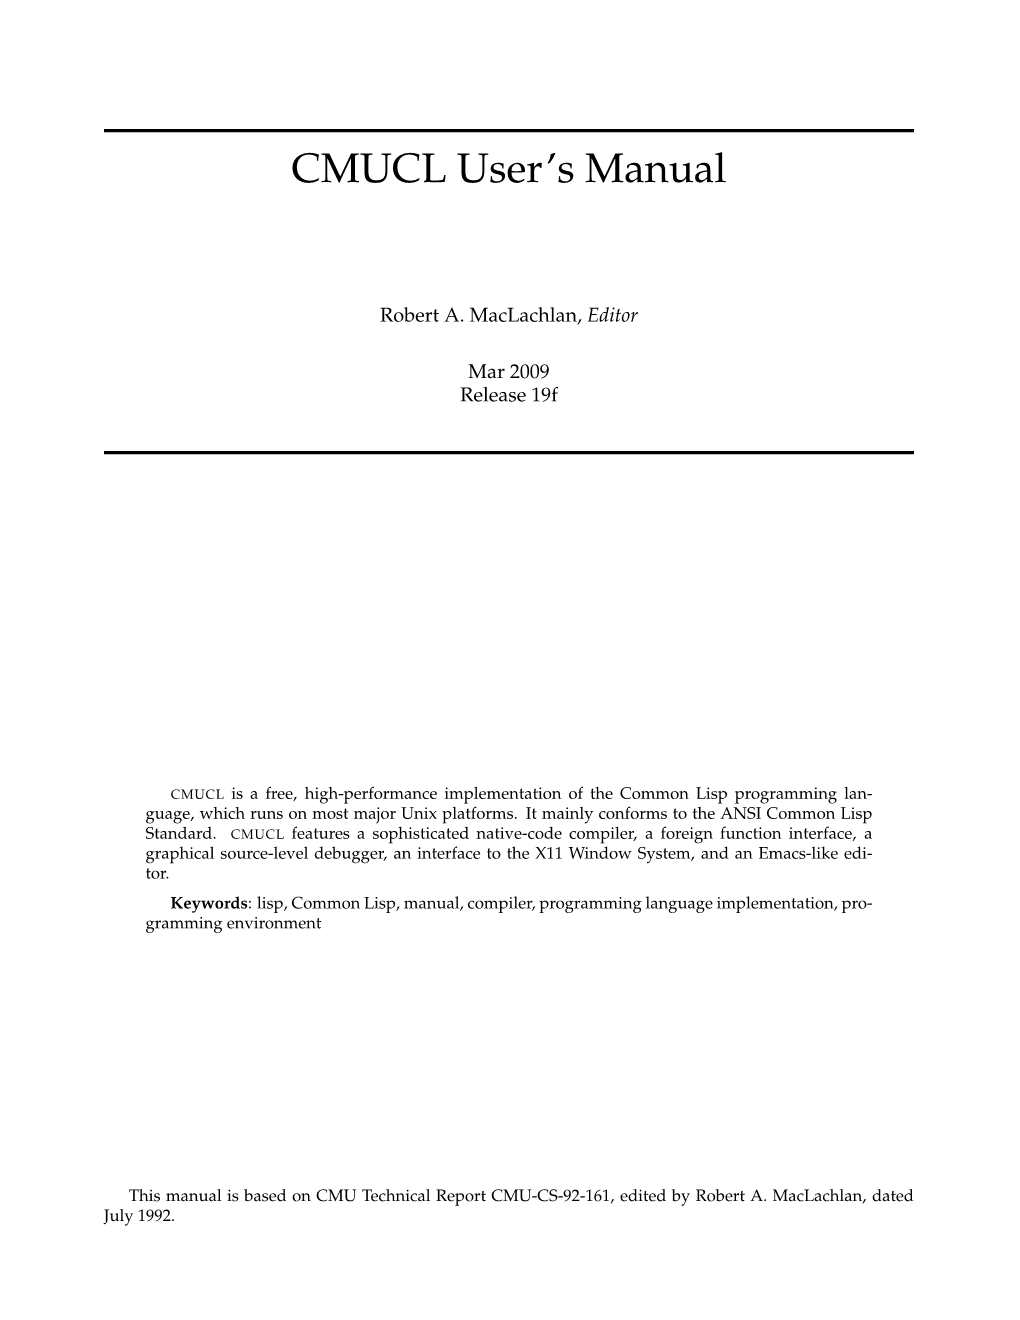 CMUCL User's Manual